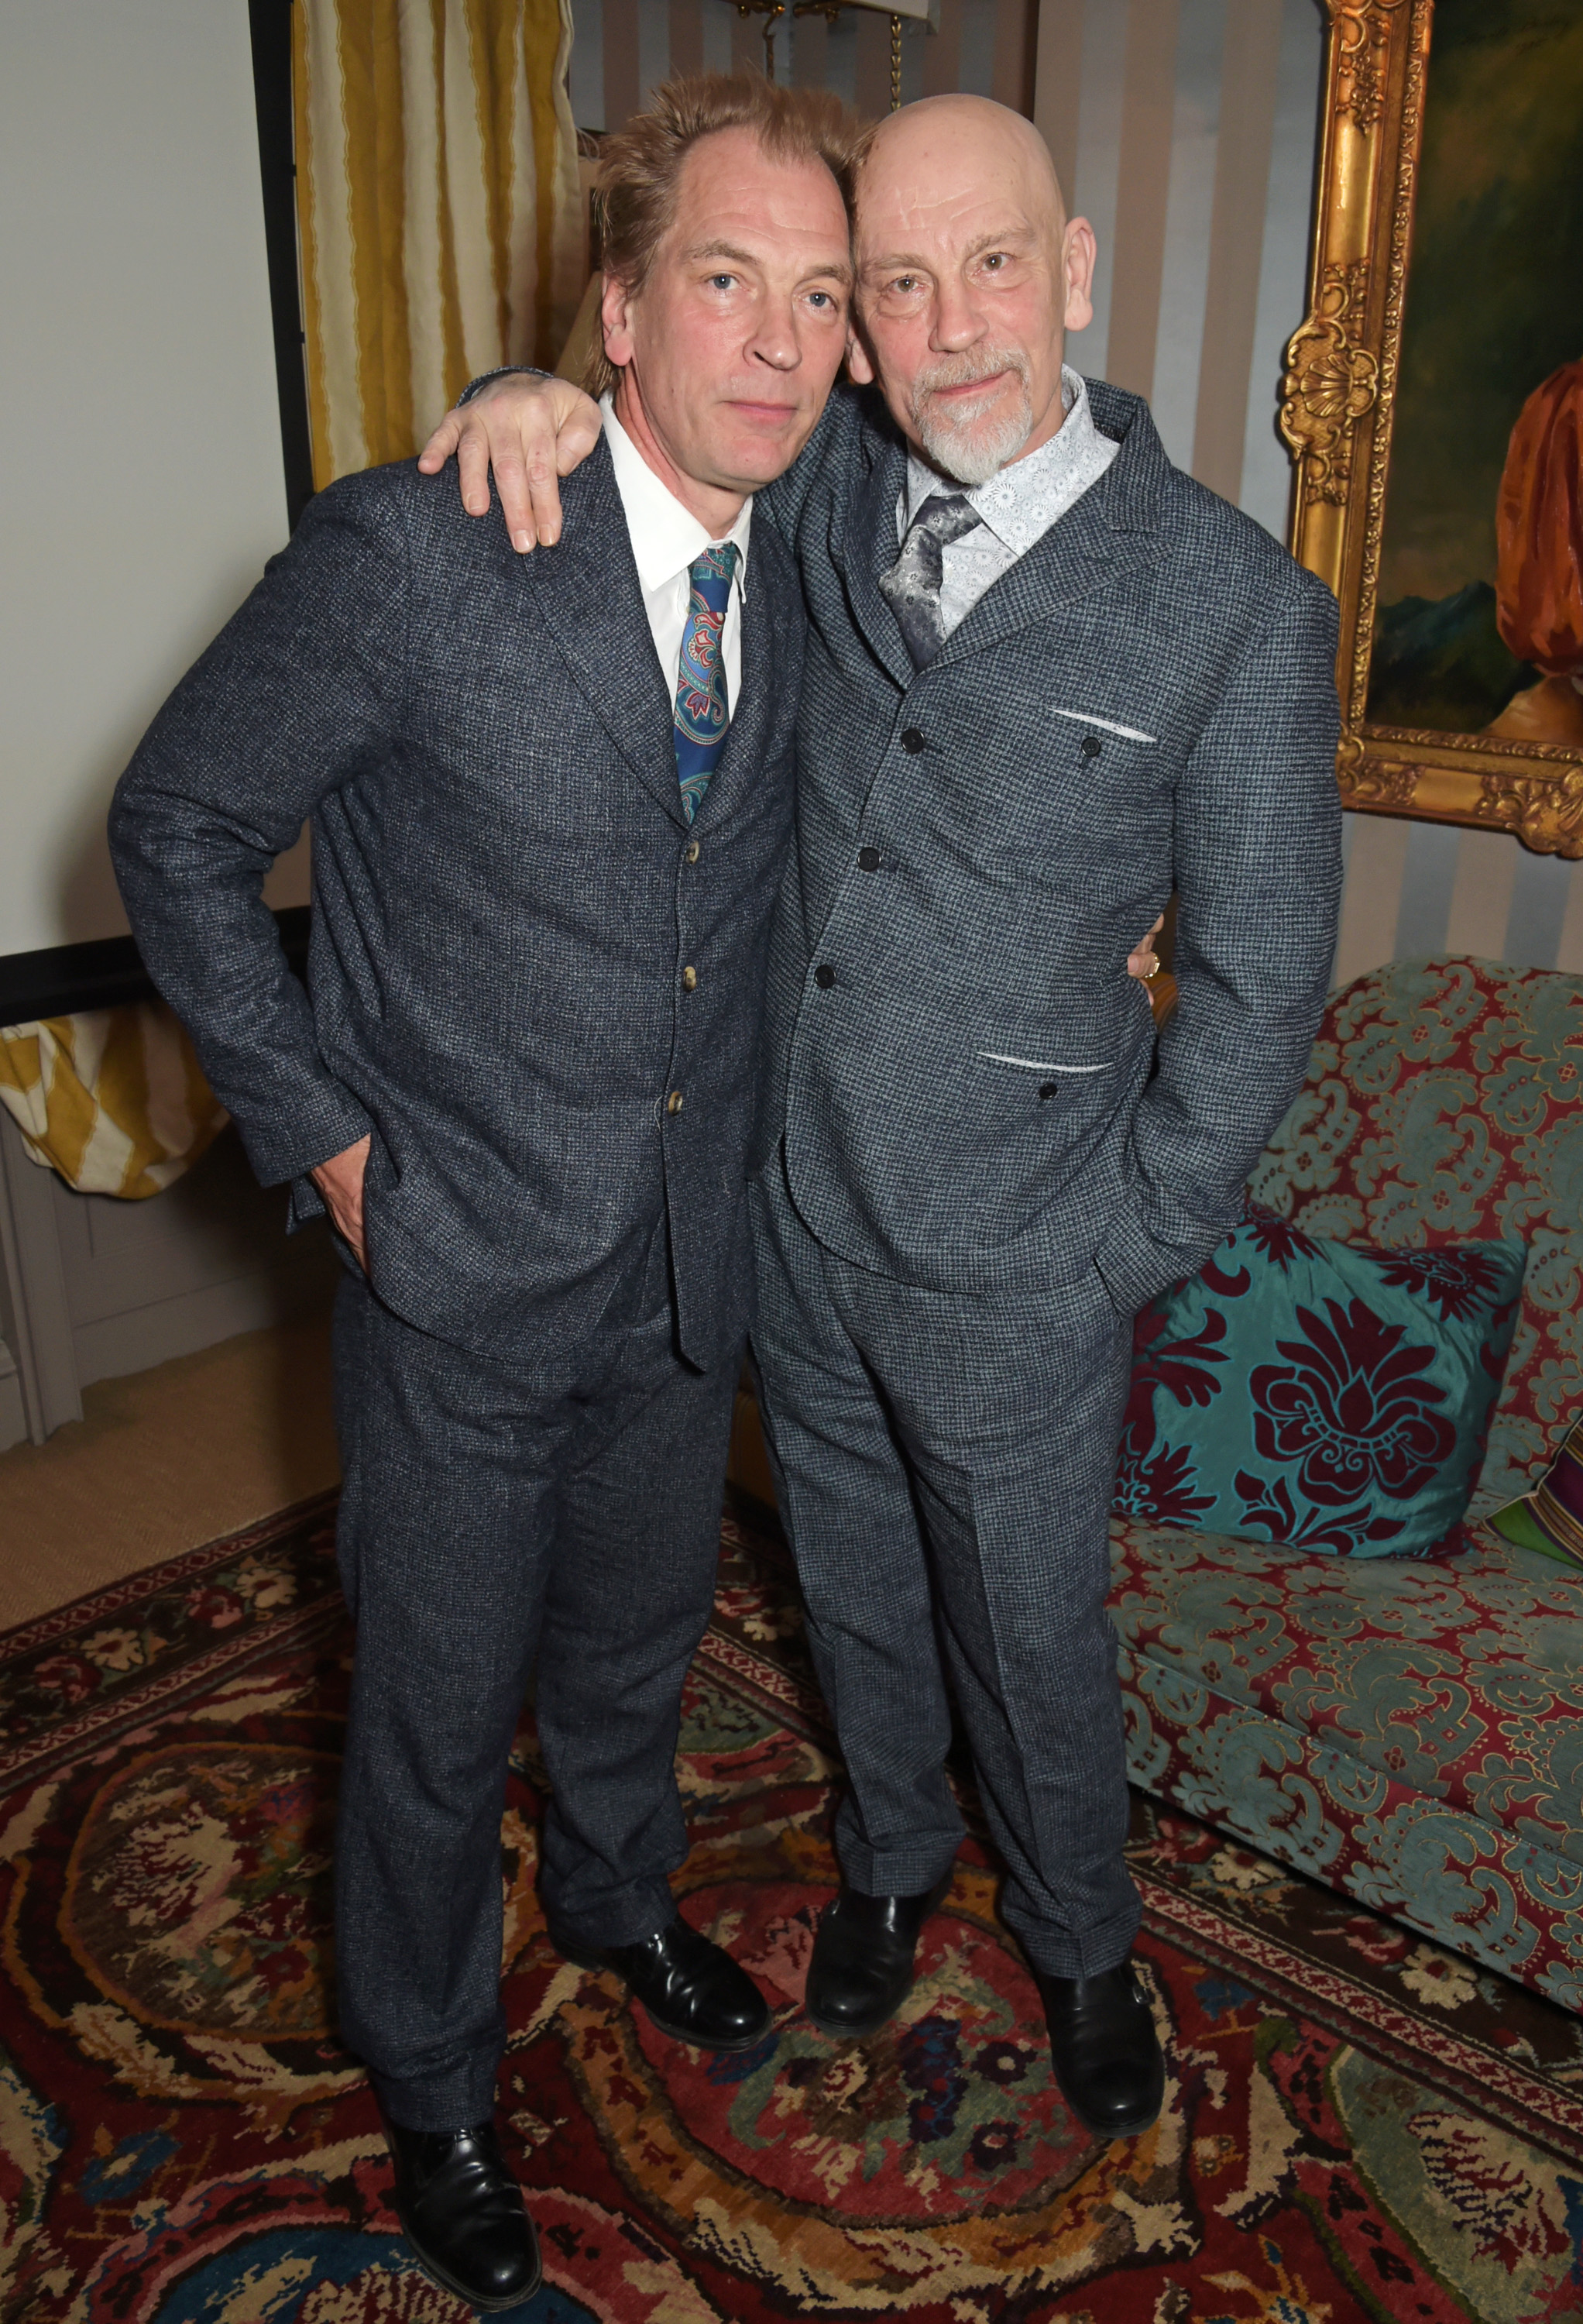 Julian Sands and John Malkovich pose at the premiere of "A Postcard From Istanbul," directed by John Malkovich, in collaboration with St. Regis Hotels & Resorts at 5 Hertford Street on March 3, 2015, in London, England | Source: Getty Images